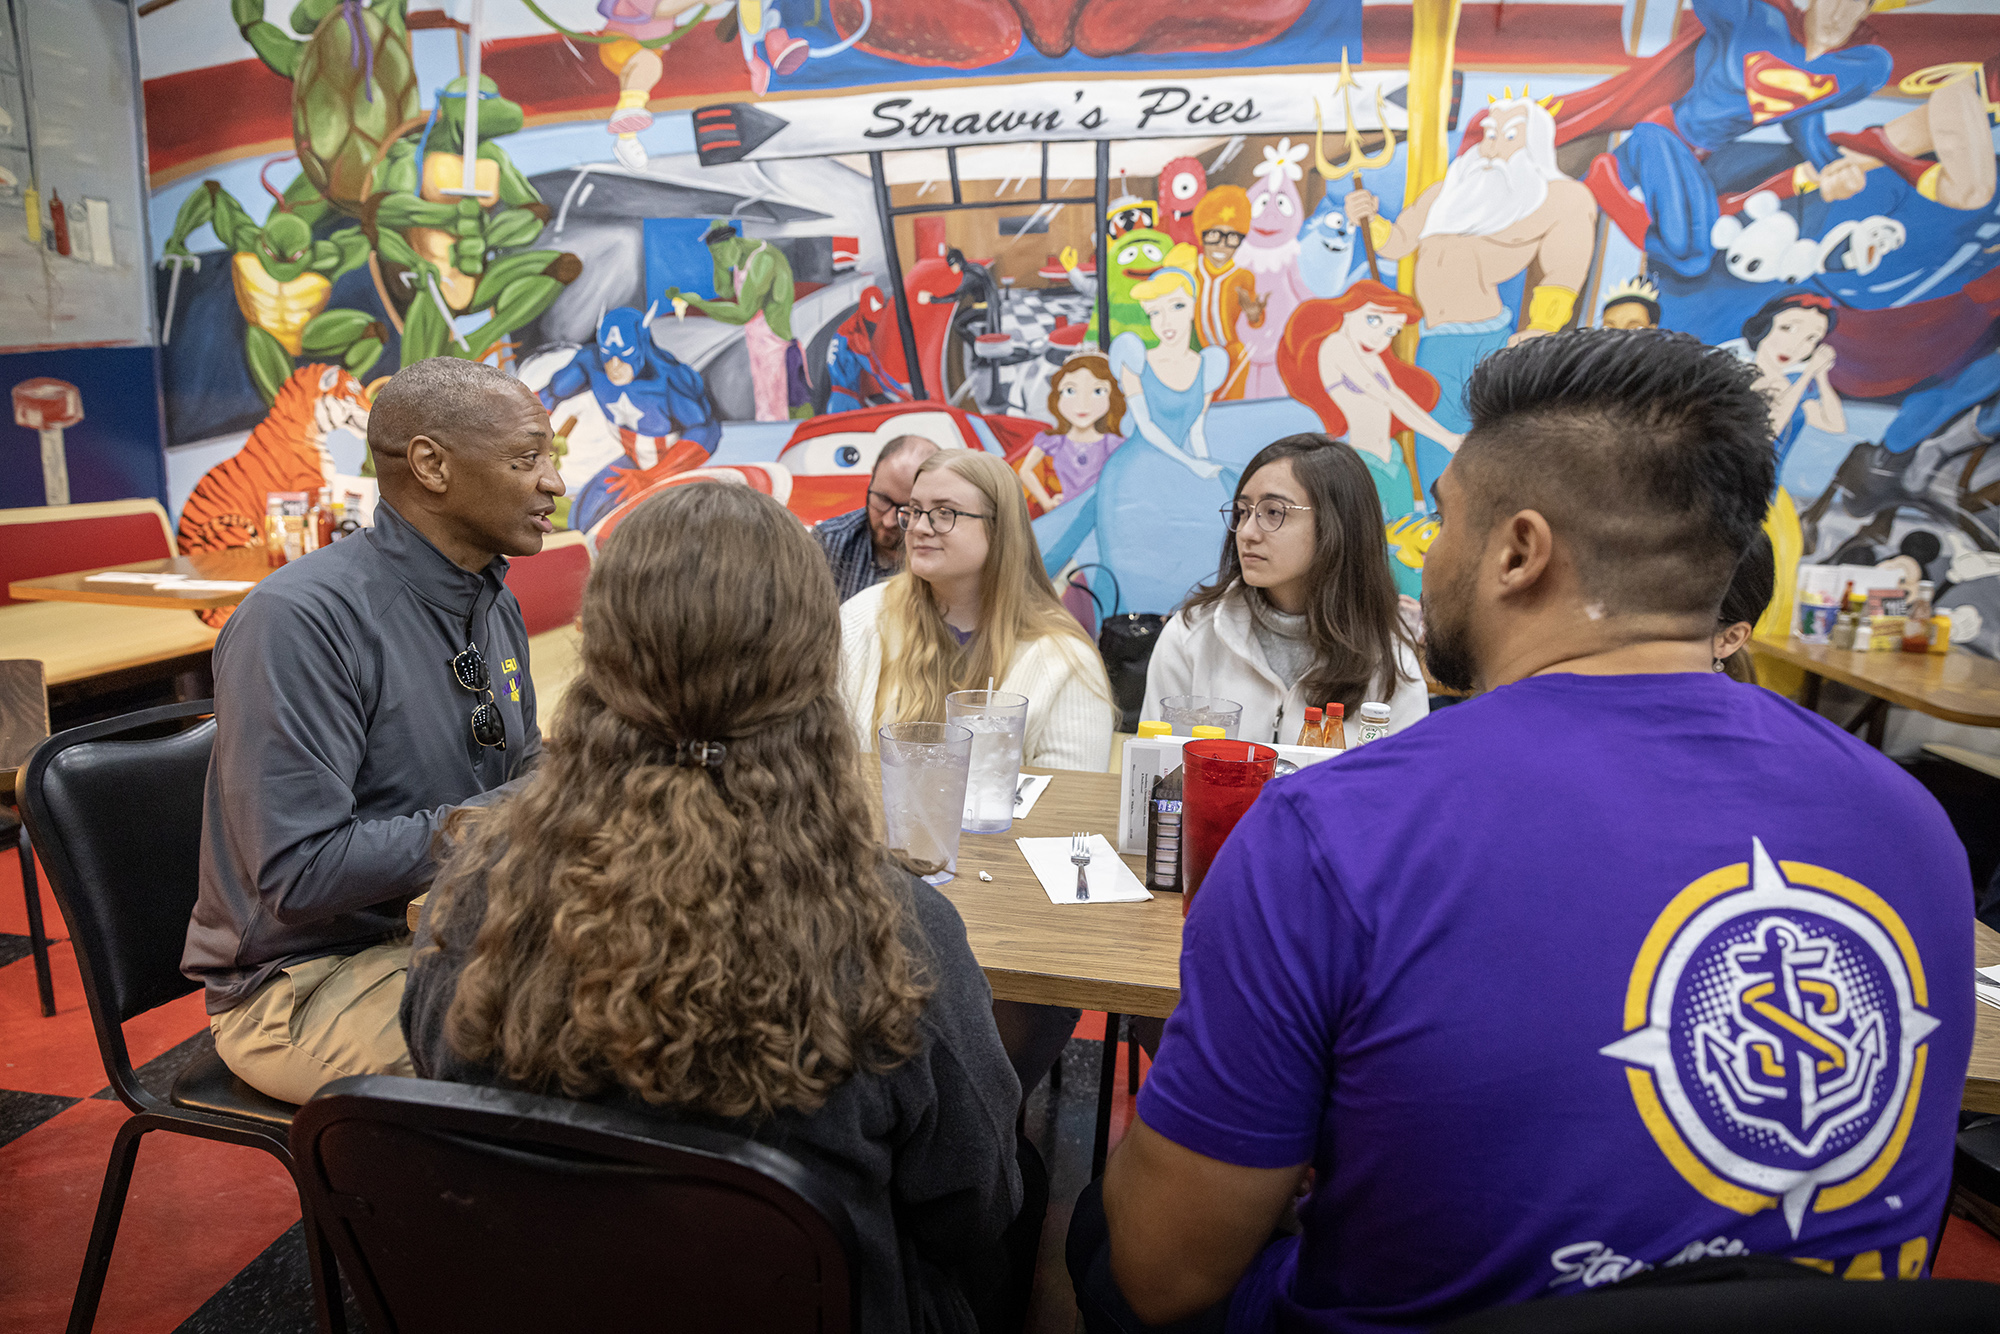 President Tate speaks with students at a table